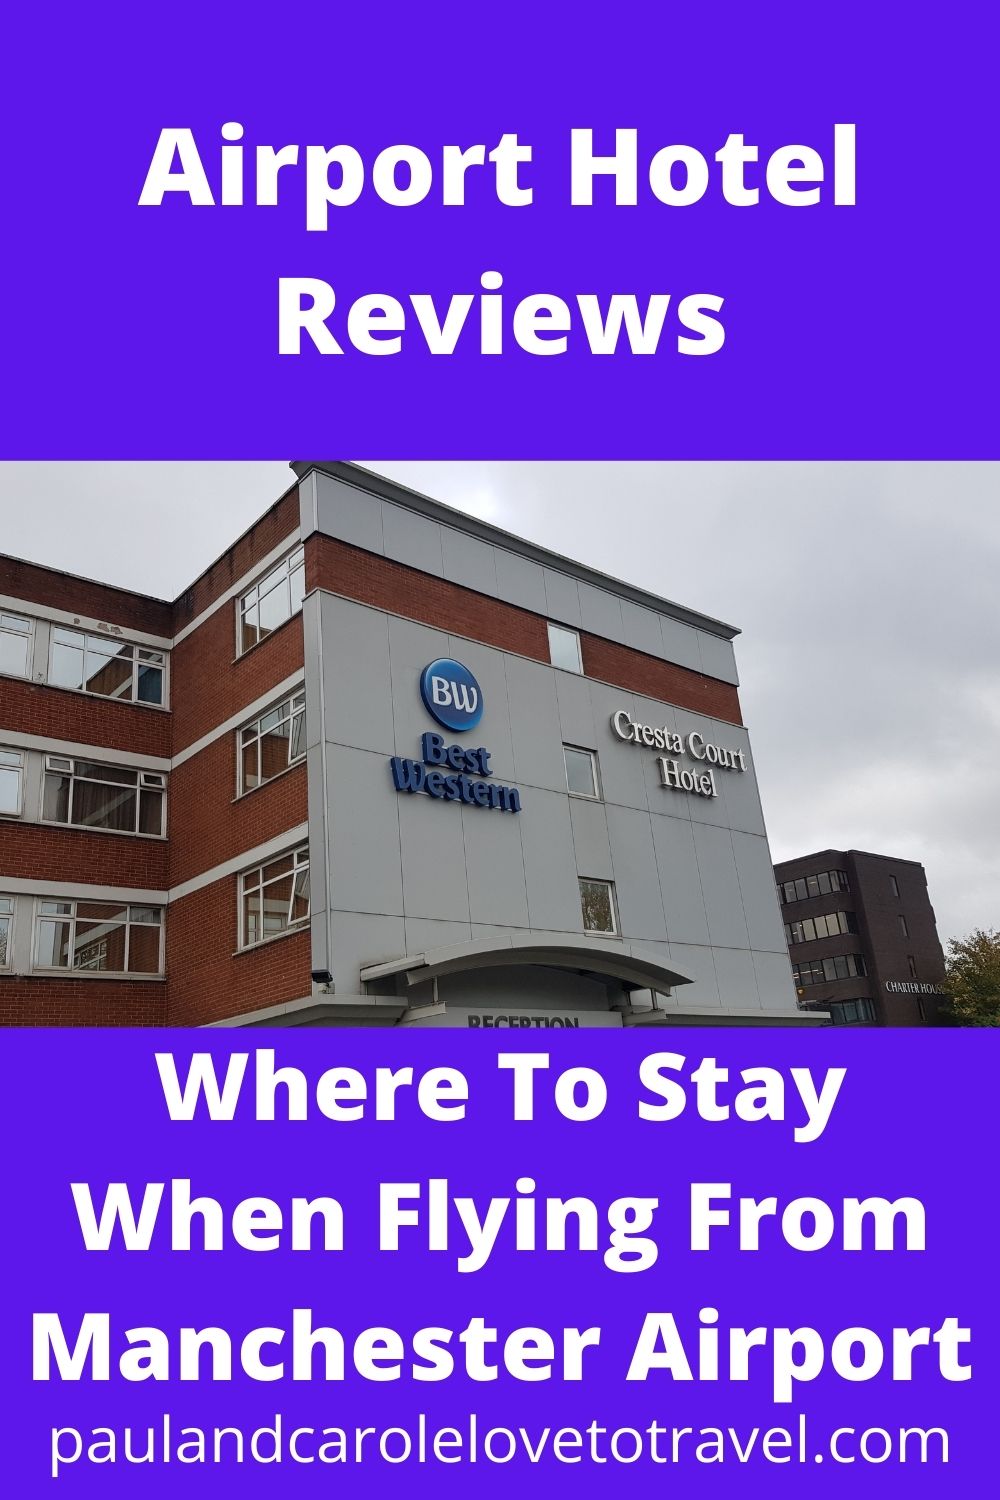 Manchester Airport Hotel Reviews Find out about the hotels we have stayed at when flying from Manchester Airport and see if they would be good for you! #Manchester #Airport #hotels #paulandcarole